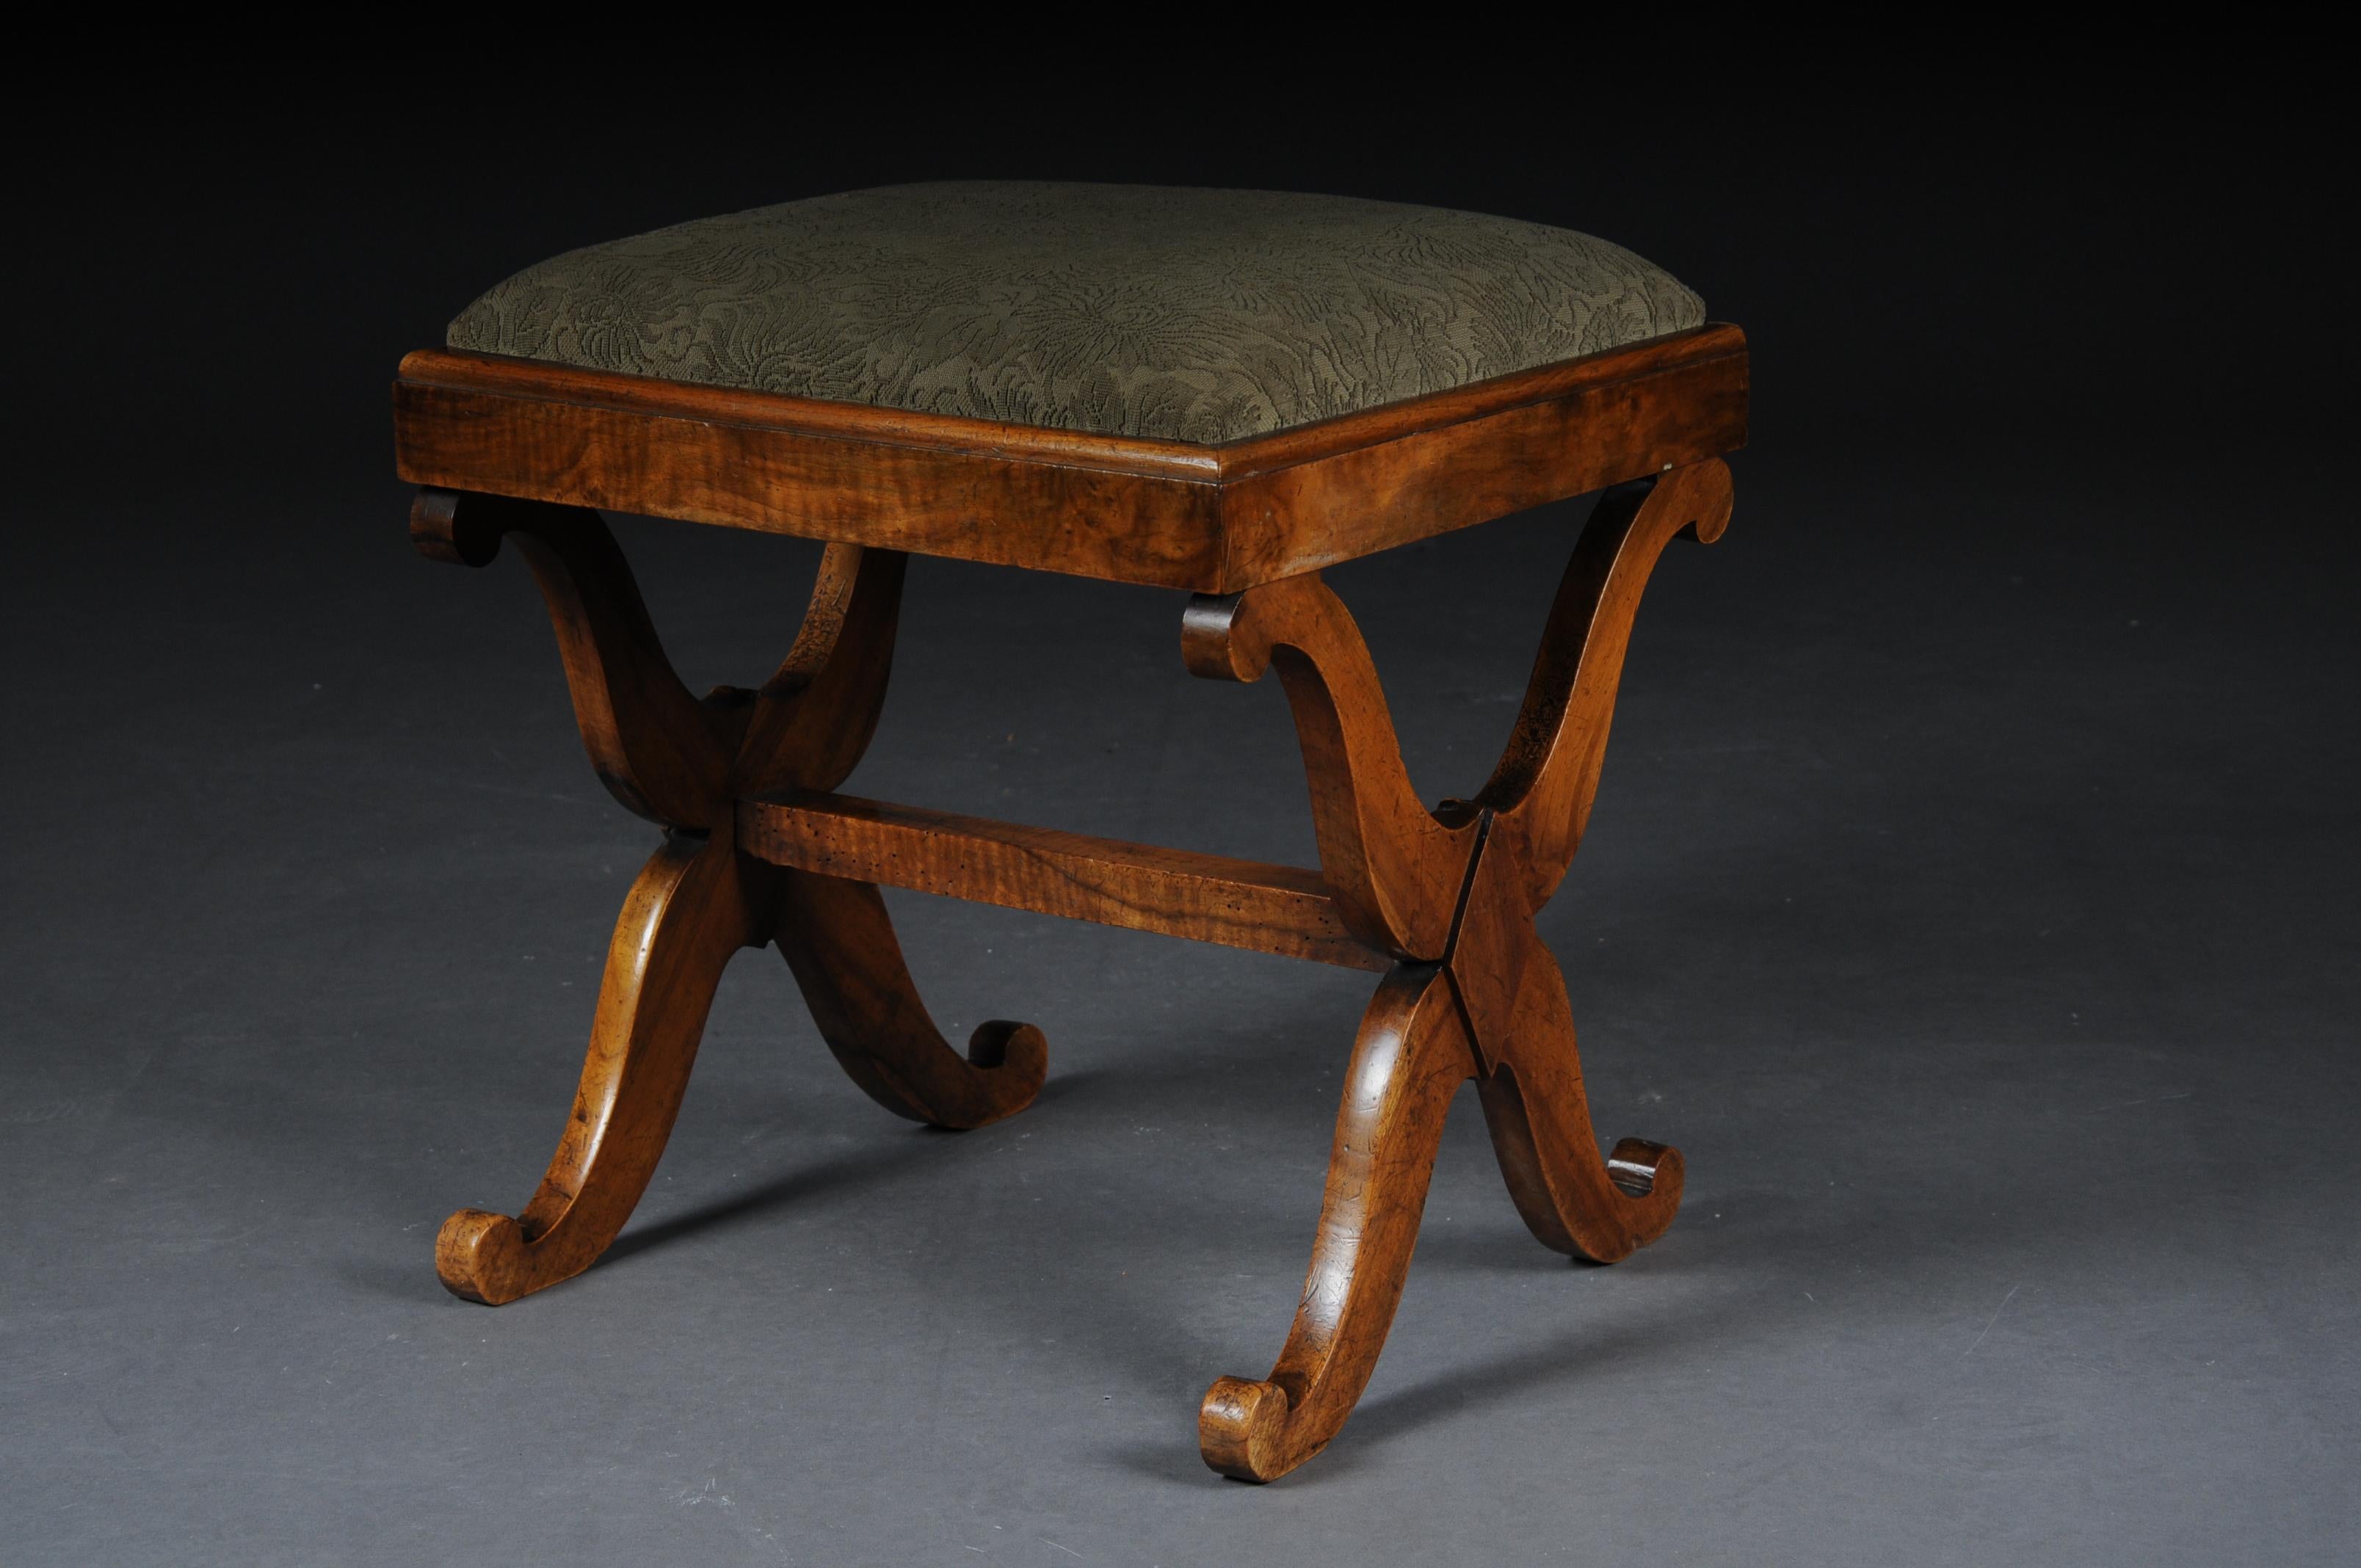 Antique Biedermeier stool / bench walnut, southern German, circa 1825

Solid wood body, seat frame with X-shaped frame connected with wooden plug. Classic seat upholstery.
Original from the Biedermeier, circa 1825, southern German.

(B-169).